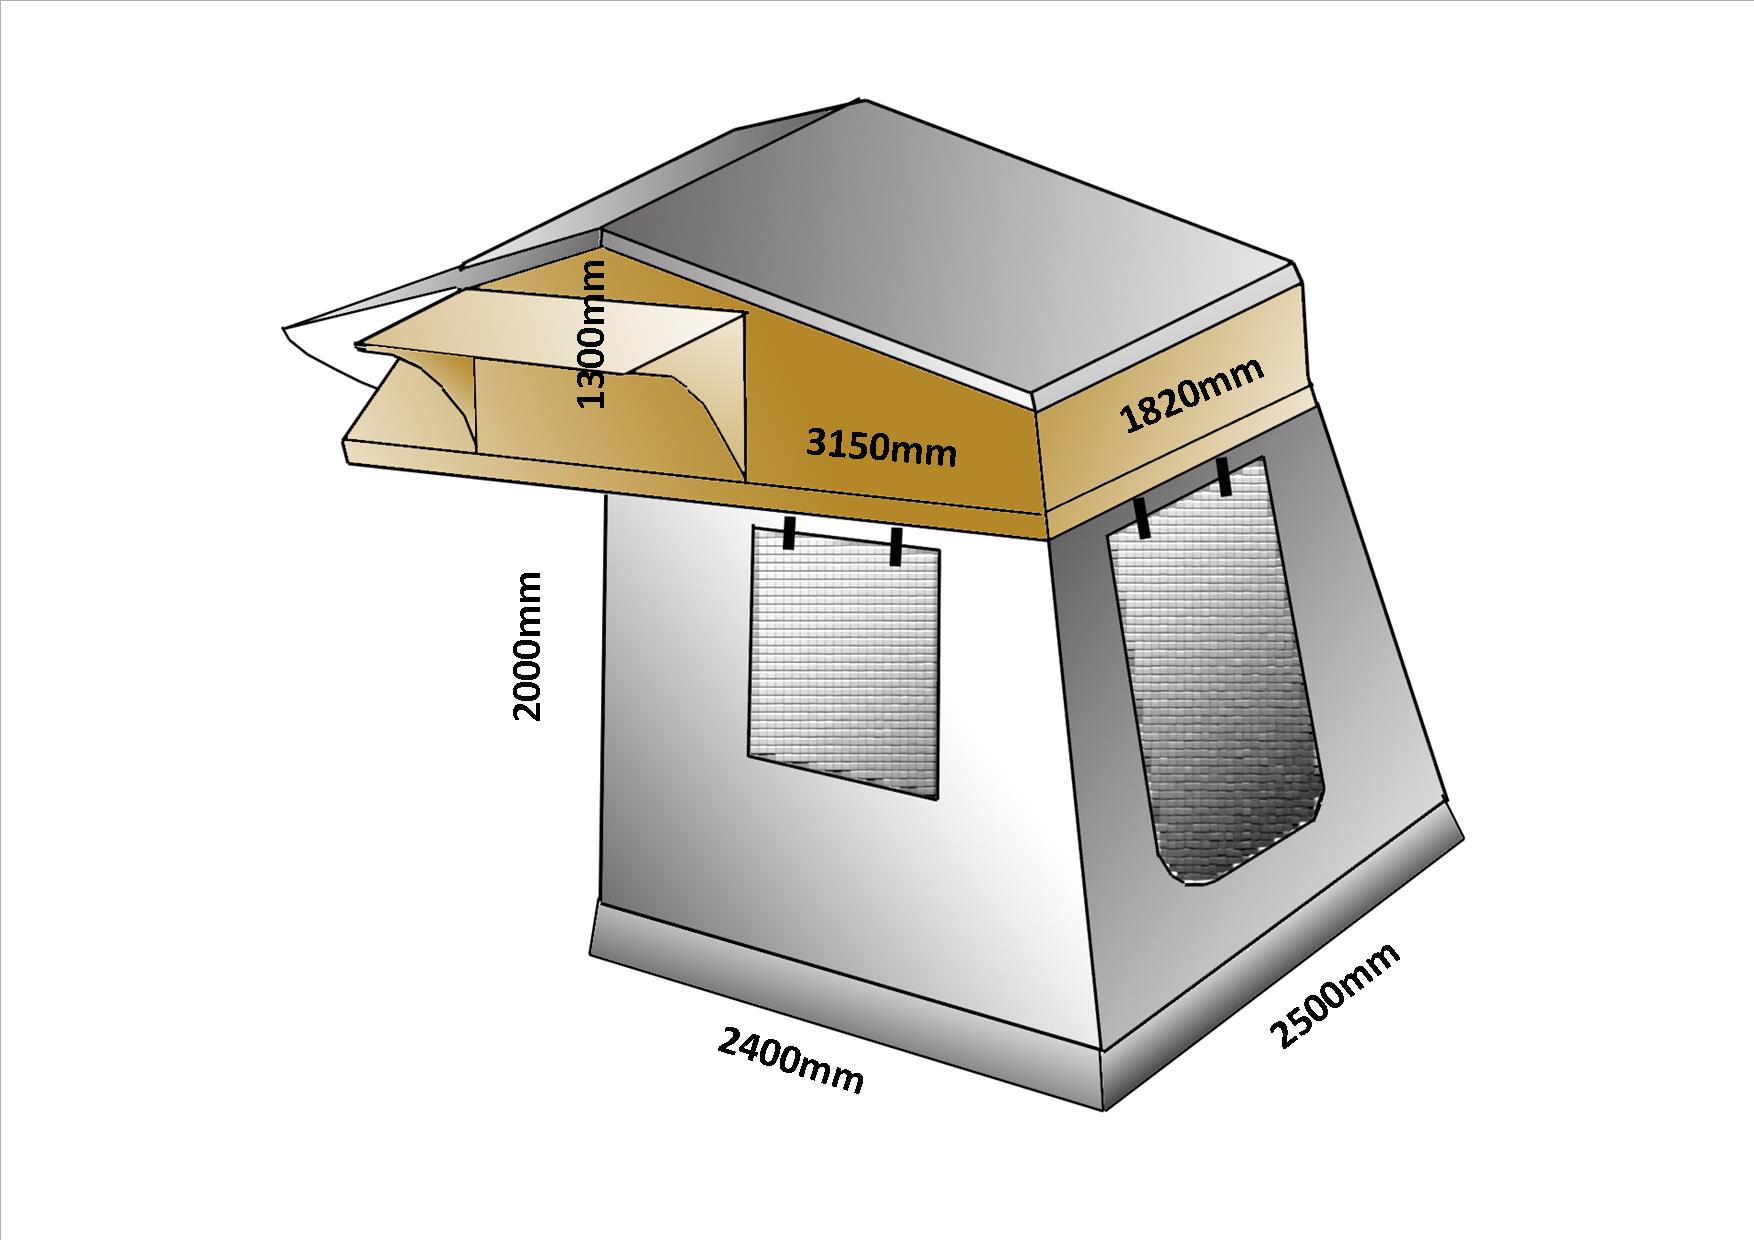 roof top tent dimensions 1.8m